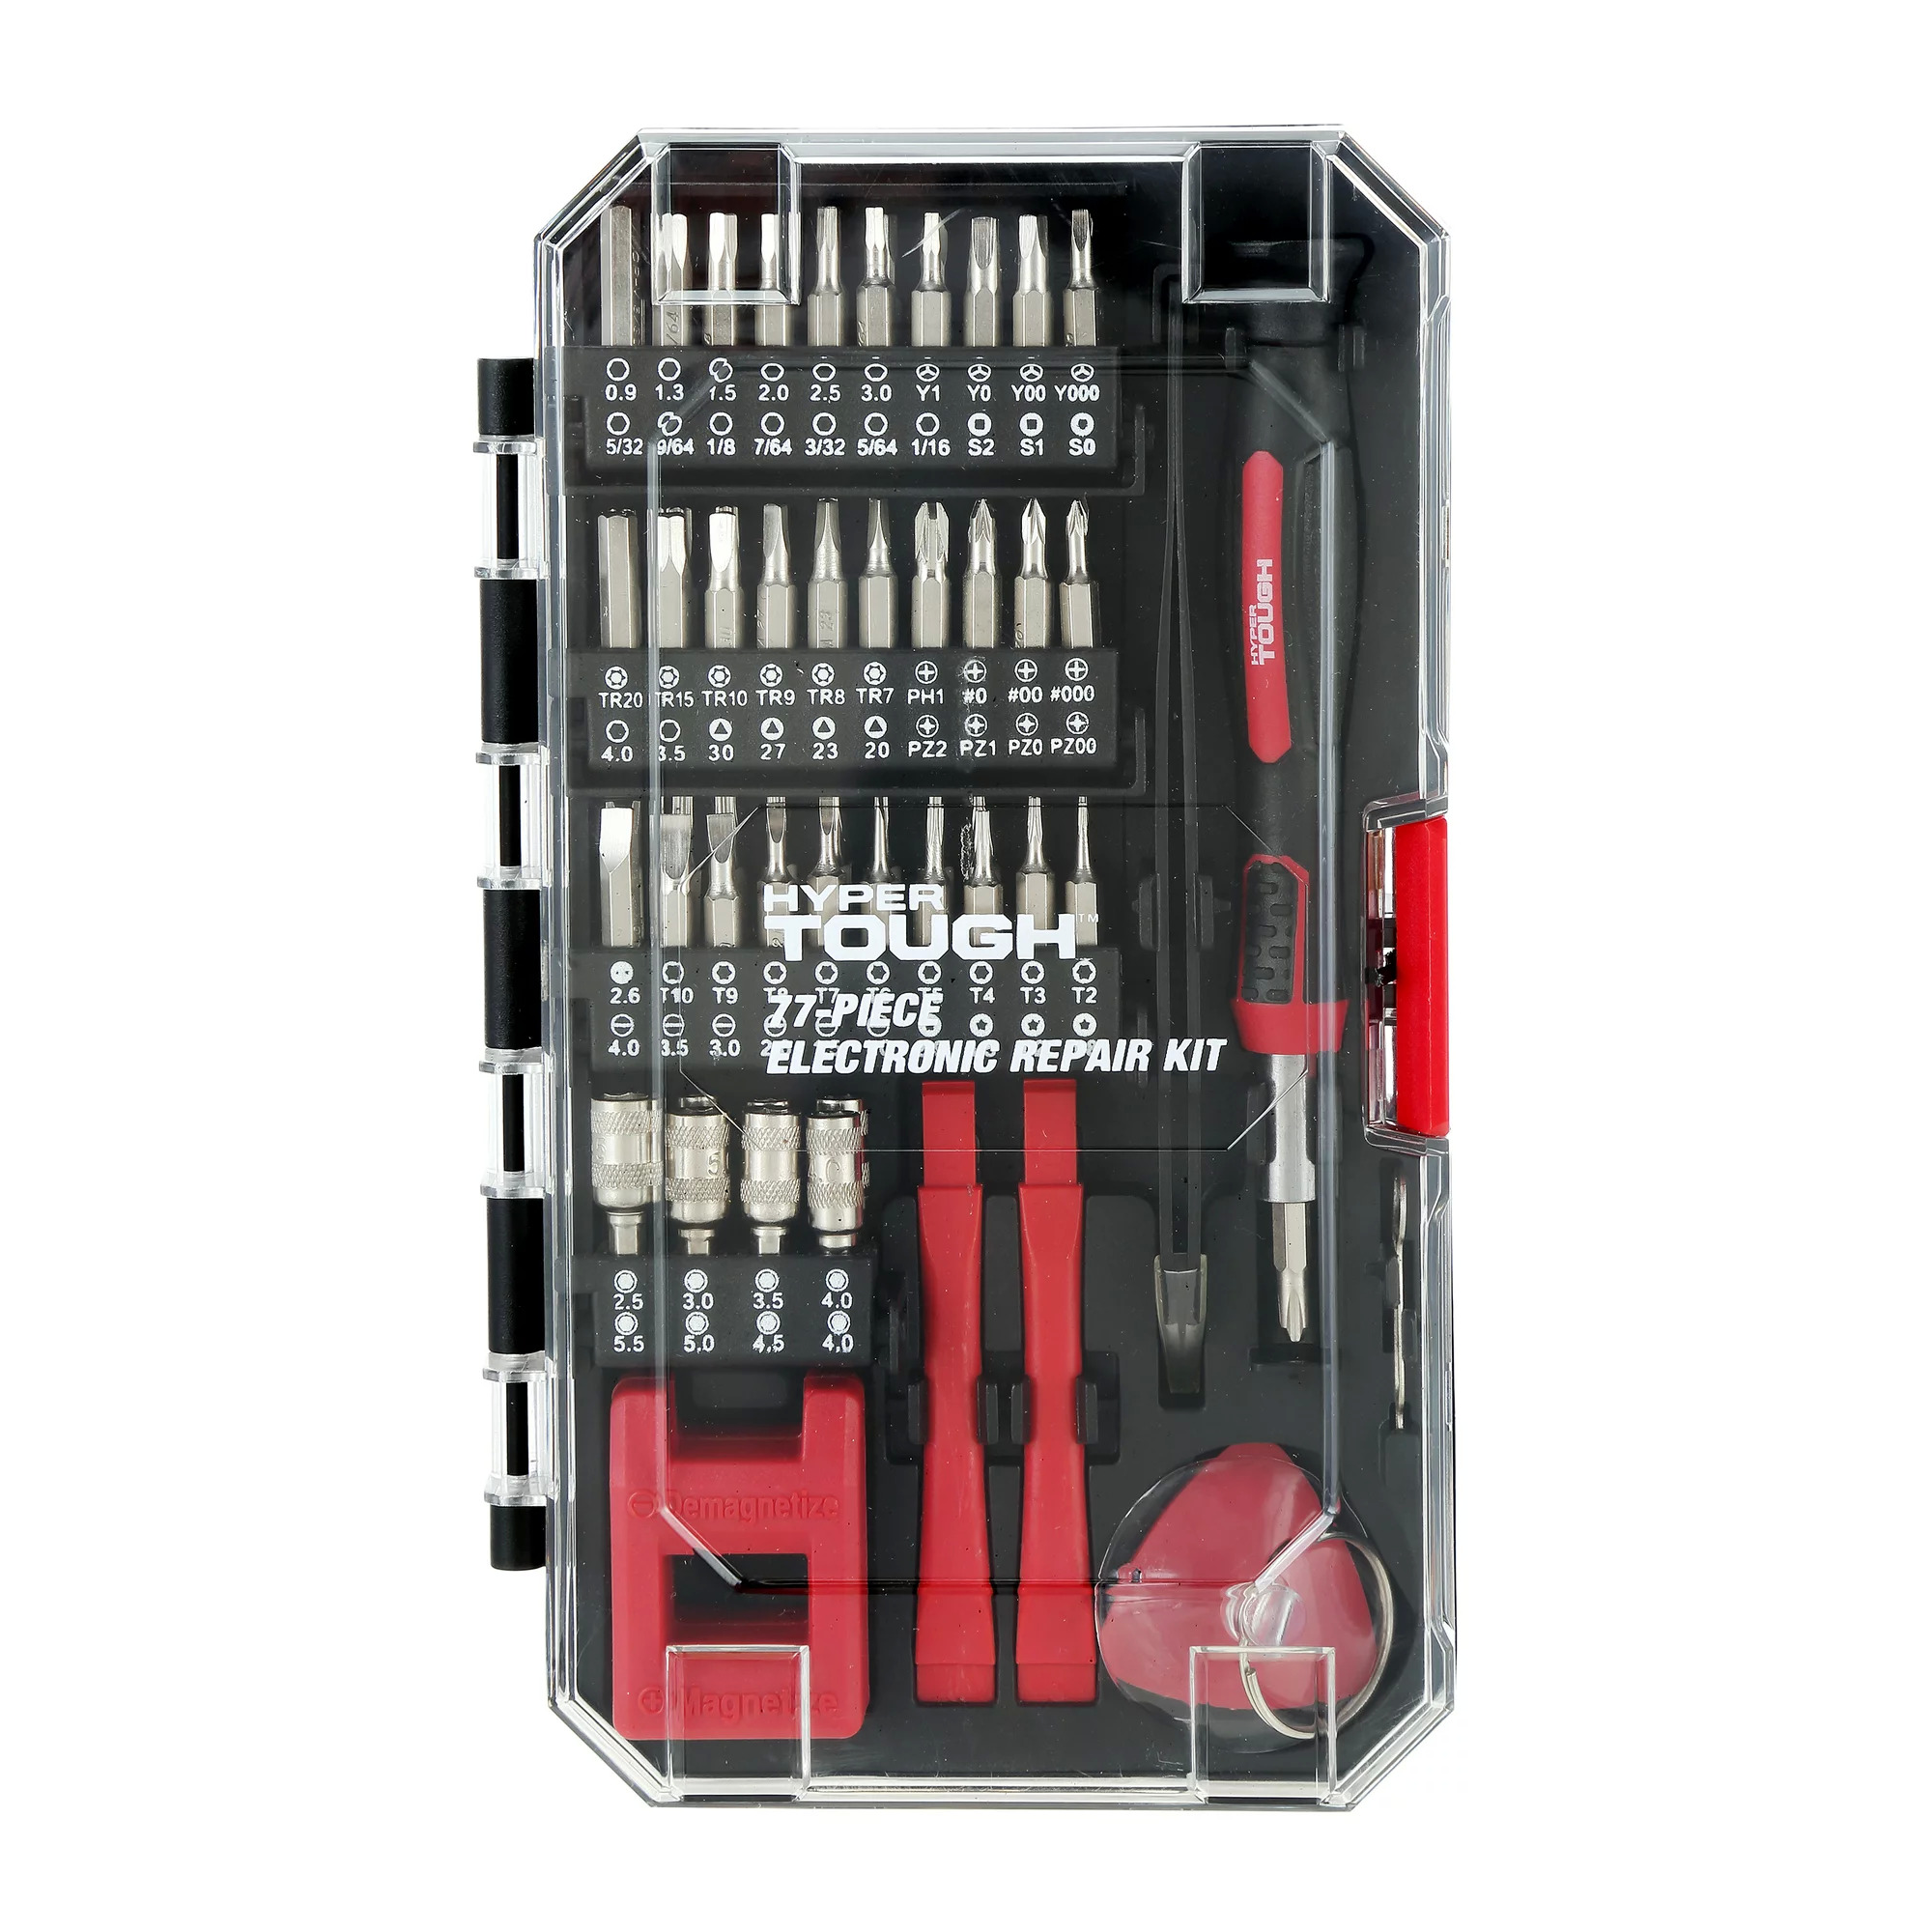 NEW iFixit Pro Tech Toolkit with carrybag for electronics mobile laptop  macbook